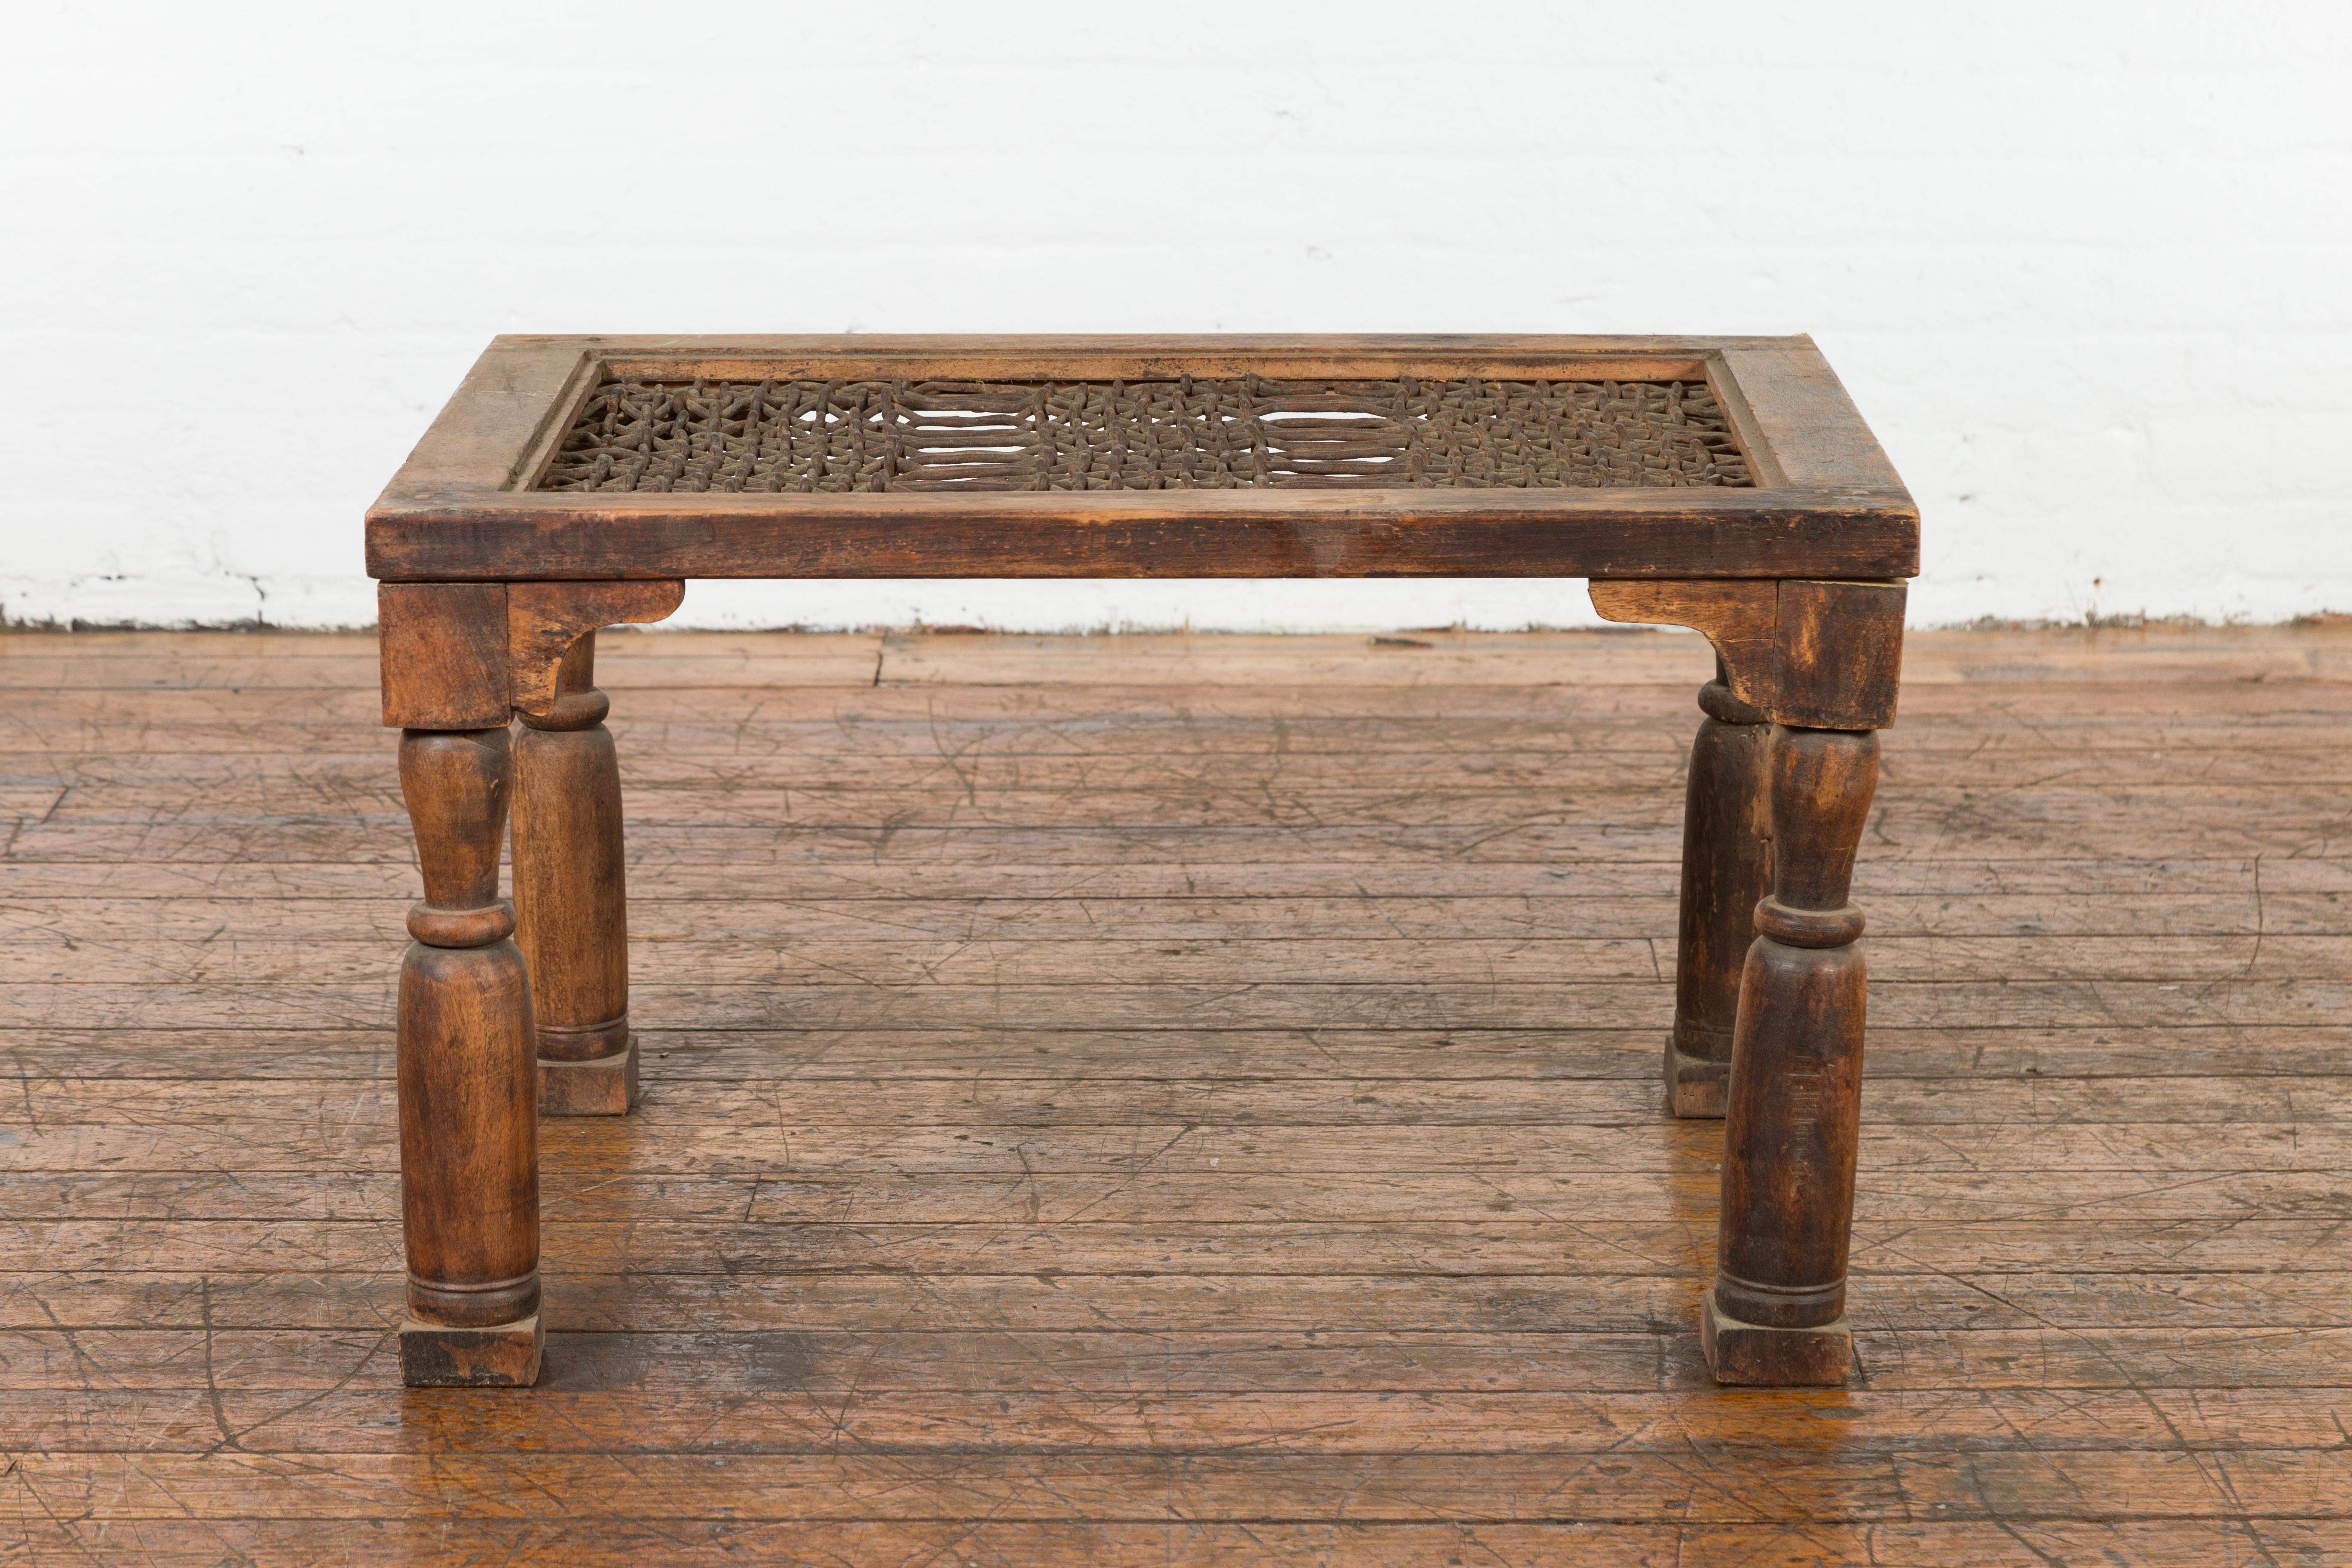 A rustic antique Indian window grate from the 19th century, made into a coffee table with carved spandrels, baluster legs and weathered appearance. Created in India during the 19th century, this coffee table charms us with its simple aspect and